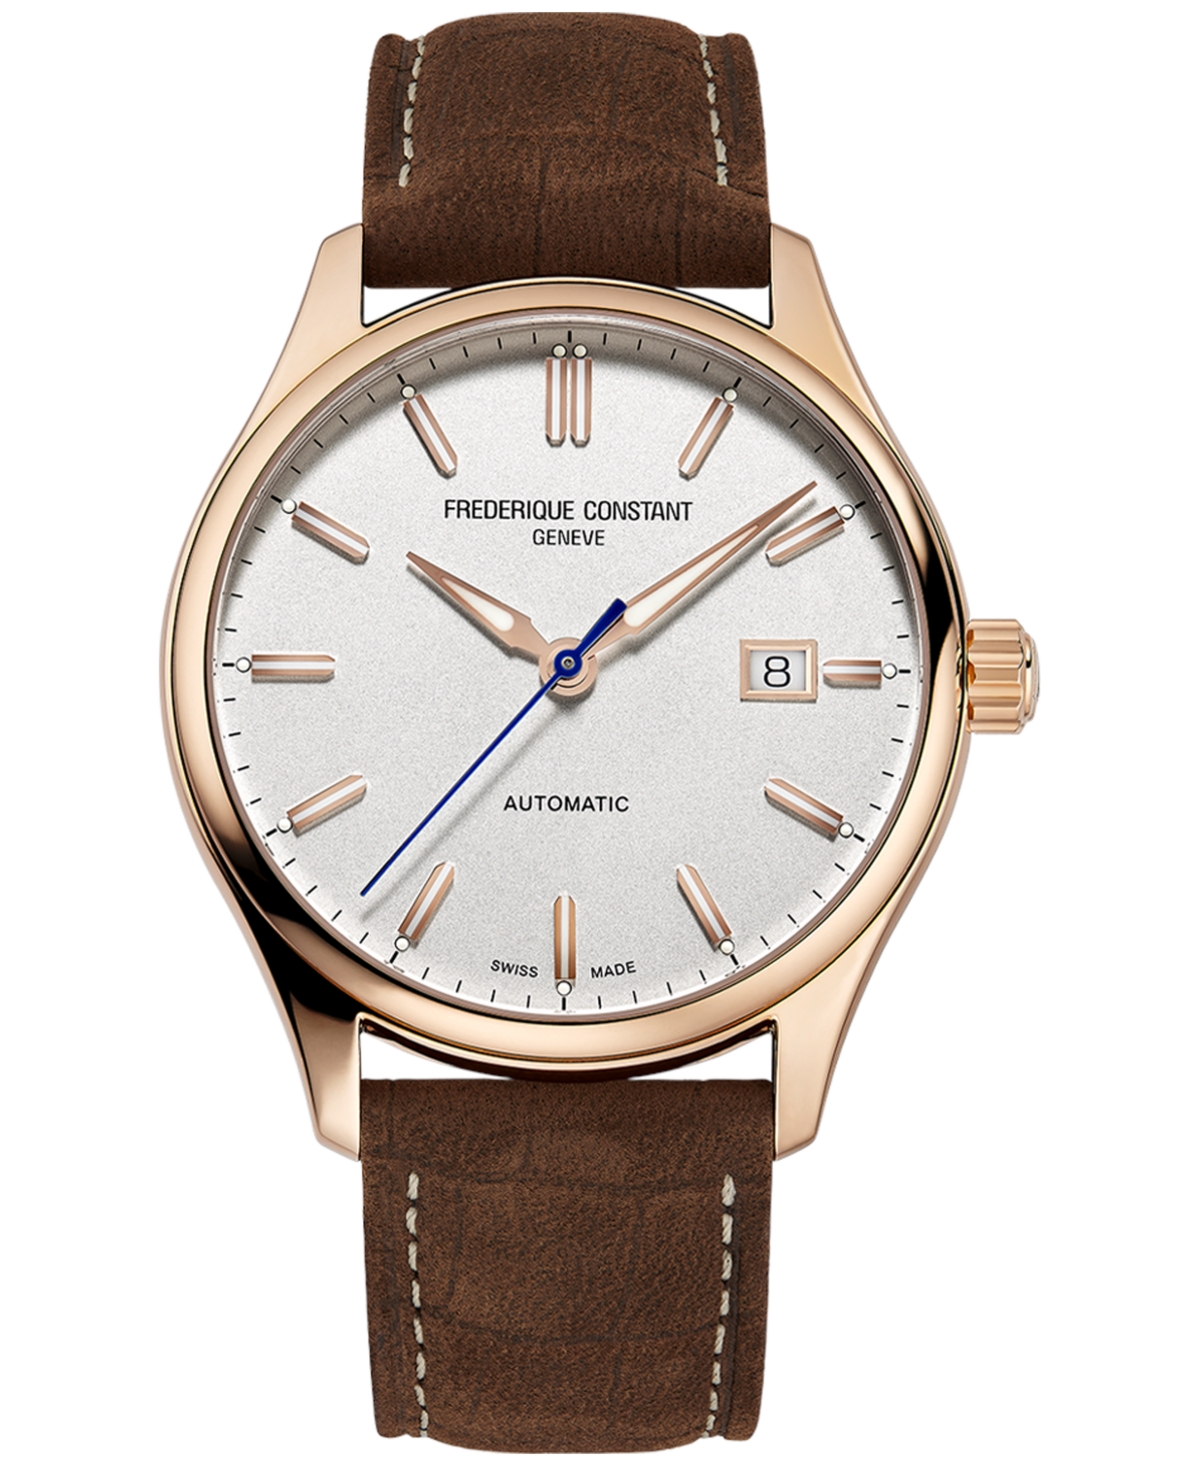 Frederique Constant Men's Swiss Automatic Classic Index Brown Leather Strap Watch 40mm